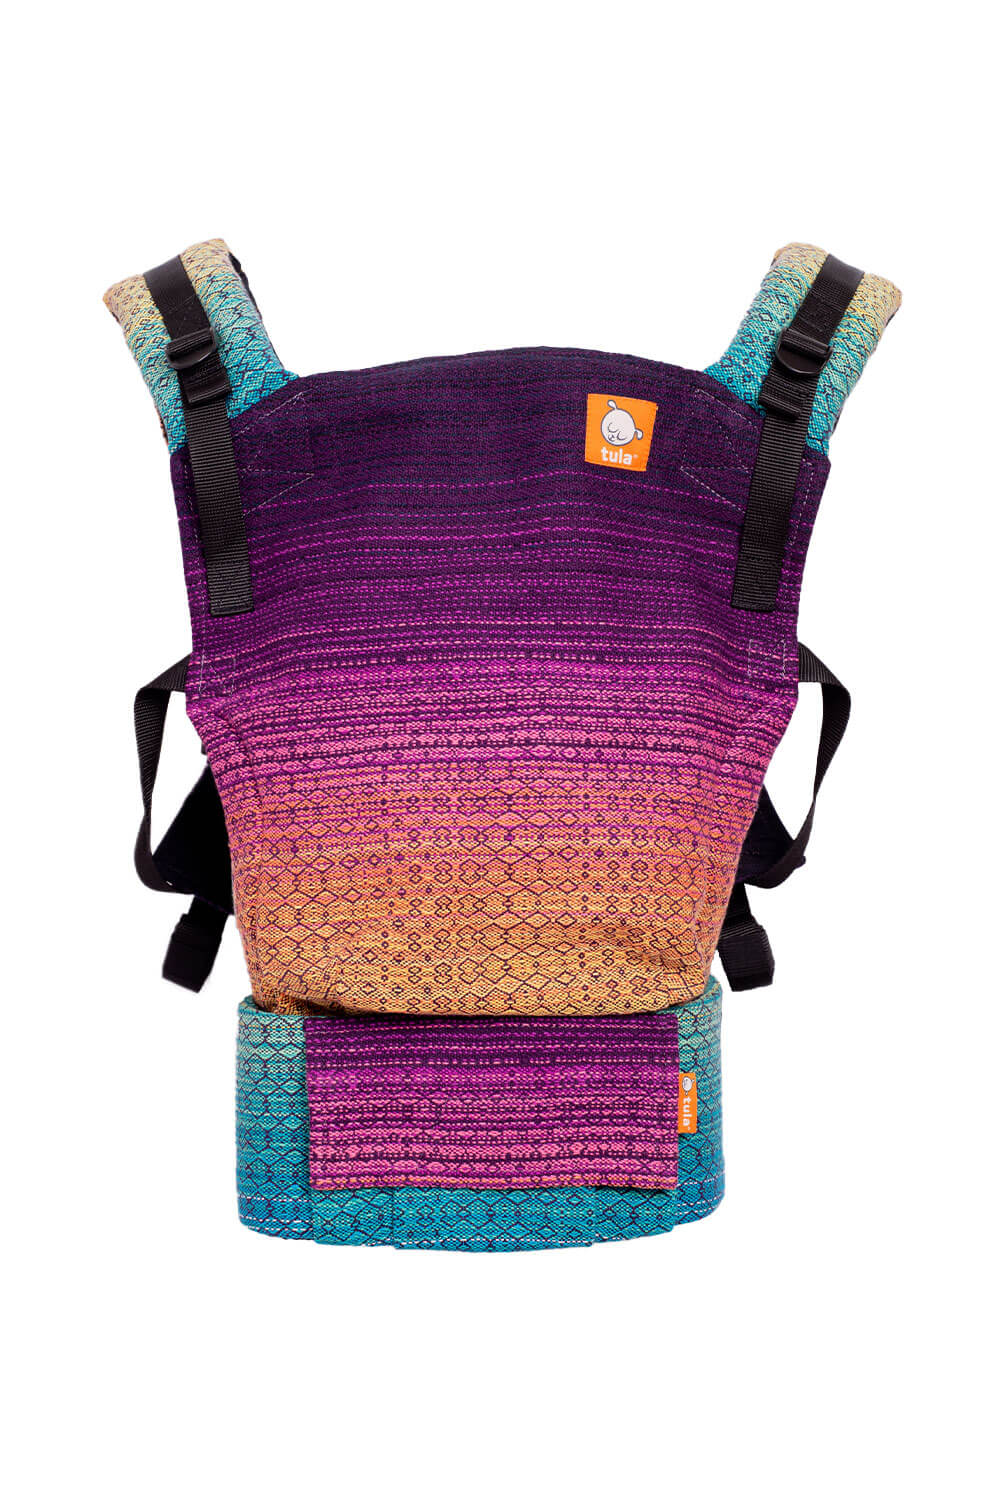 Moody Rainbow - Signature Handwoven Free-to-Grow Baby Carrier